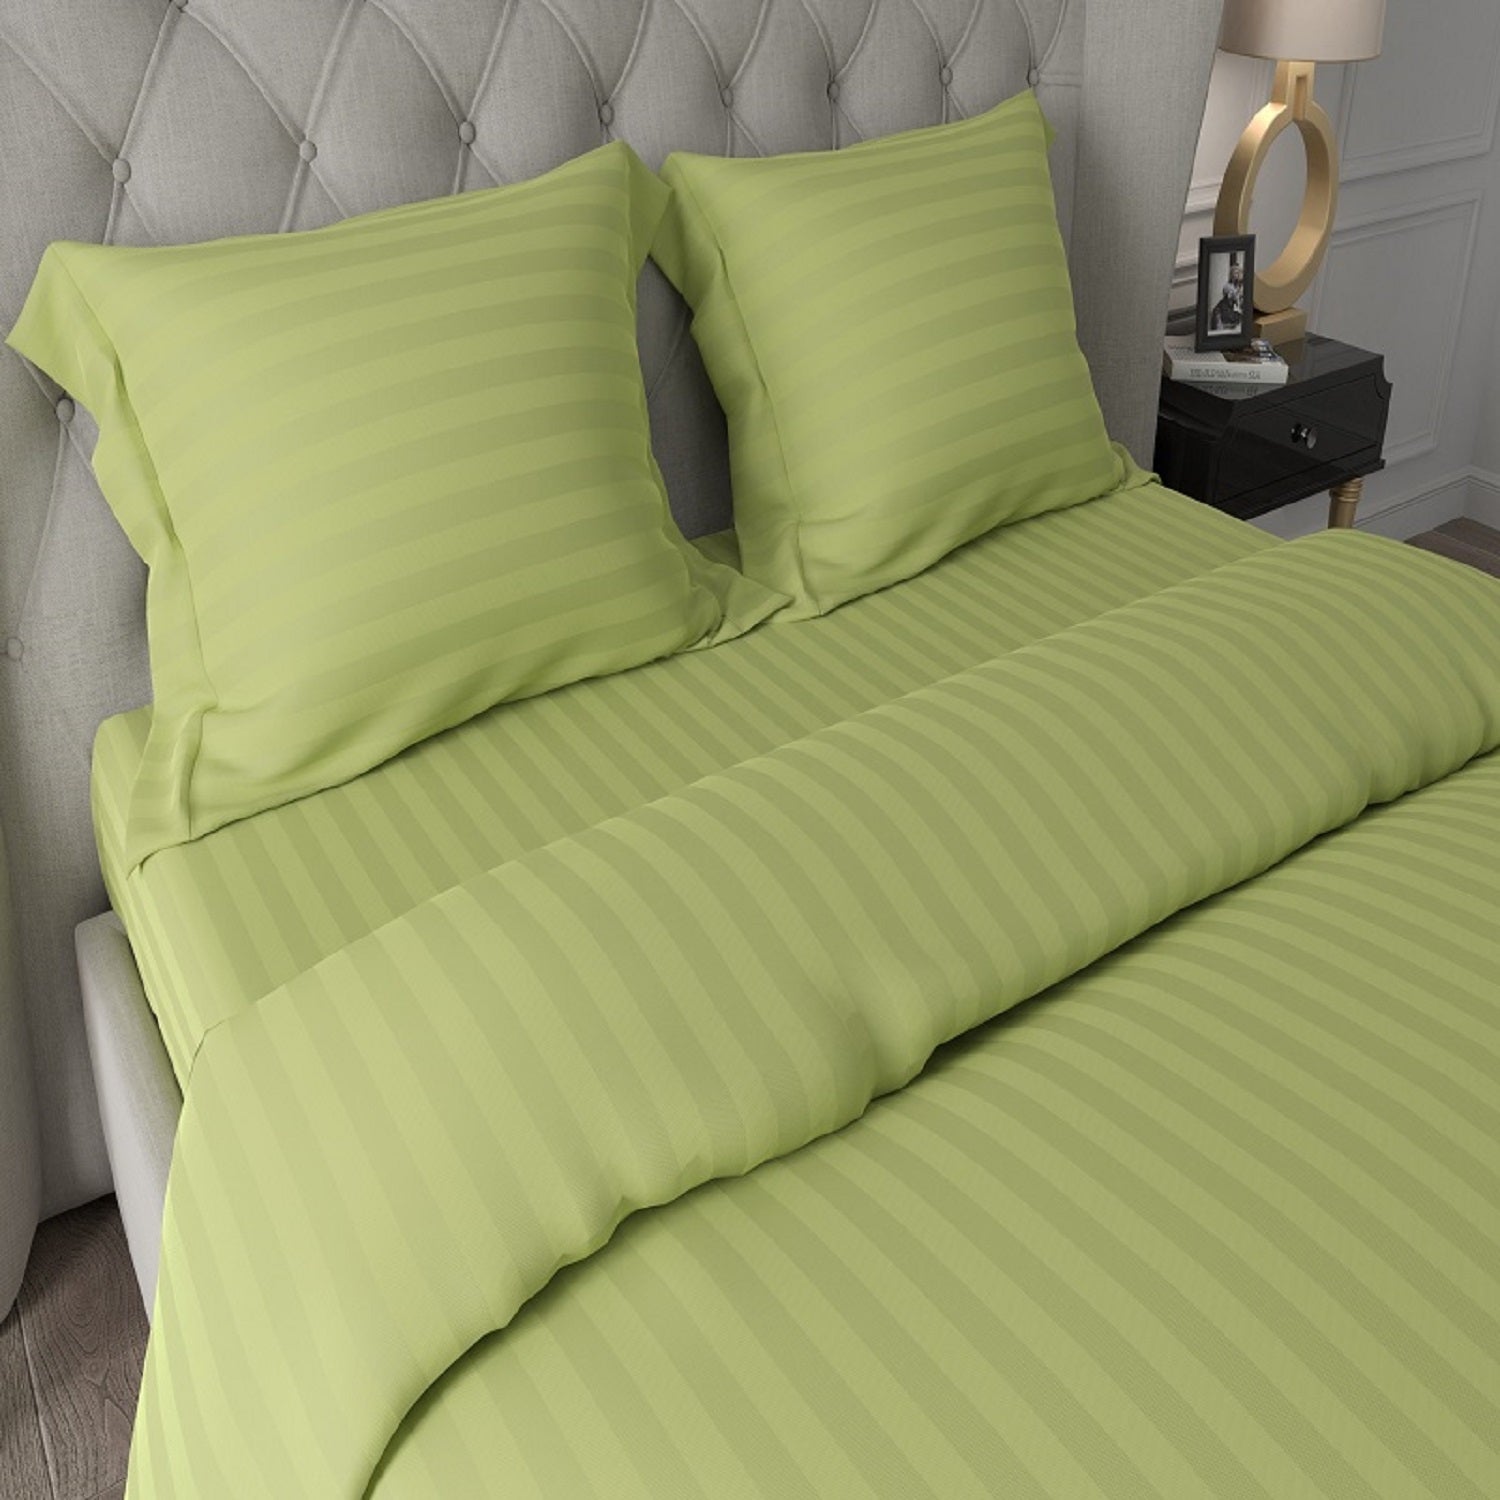 Swaas Antimicrobial 300TC Sateen Striped Pillow Covers - hfnl!fe